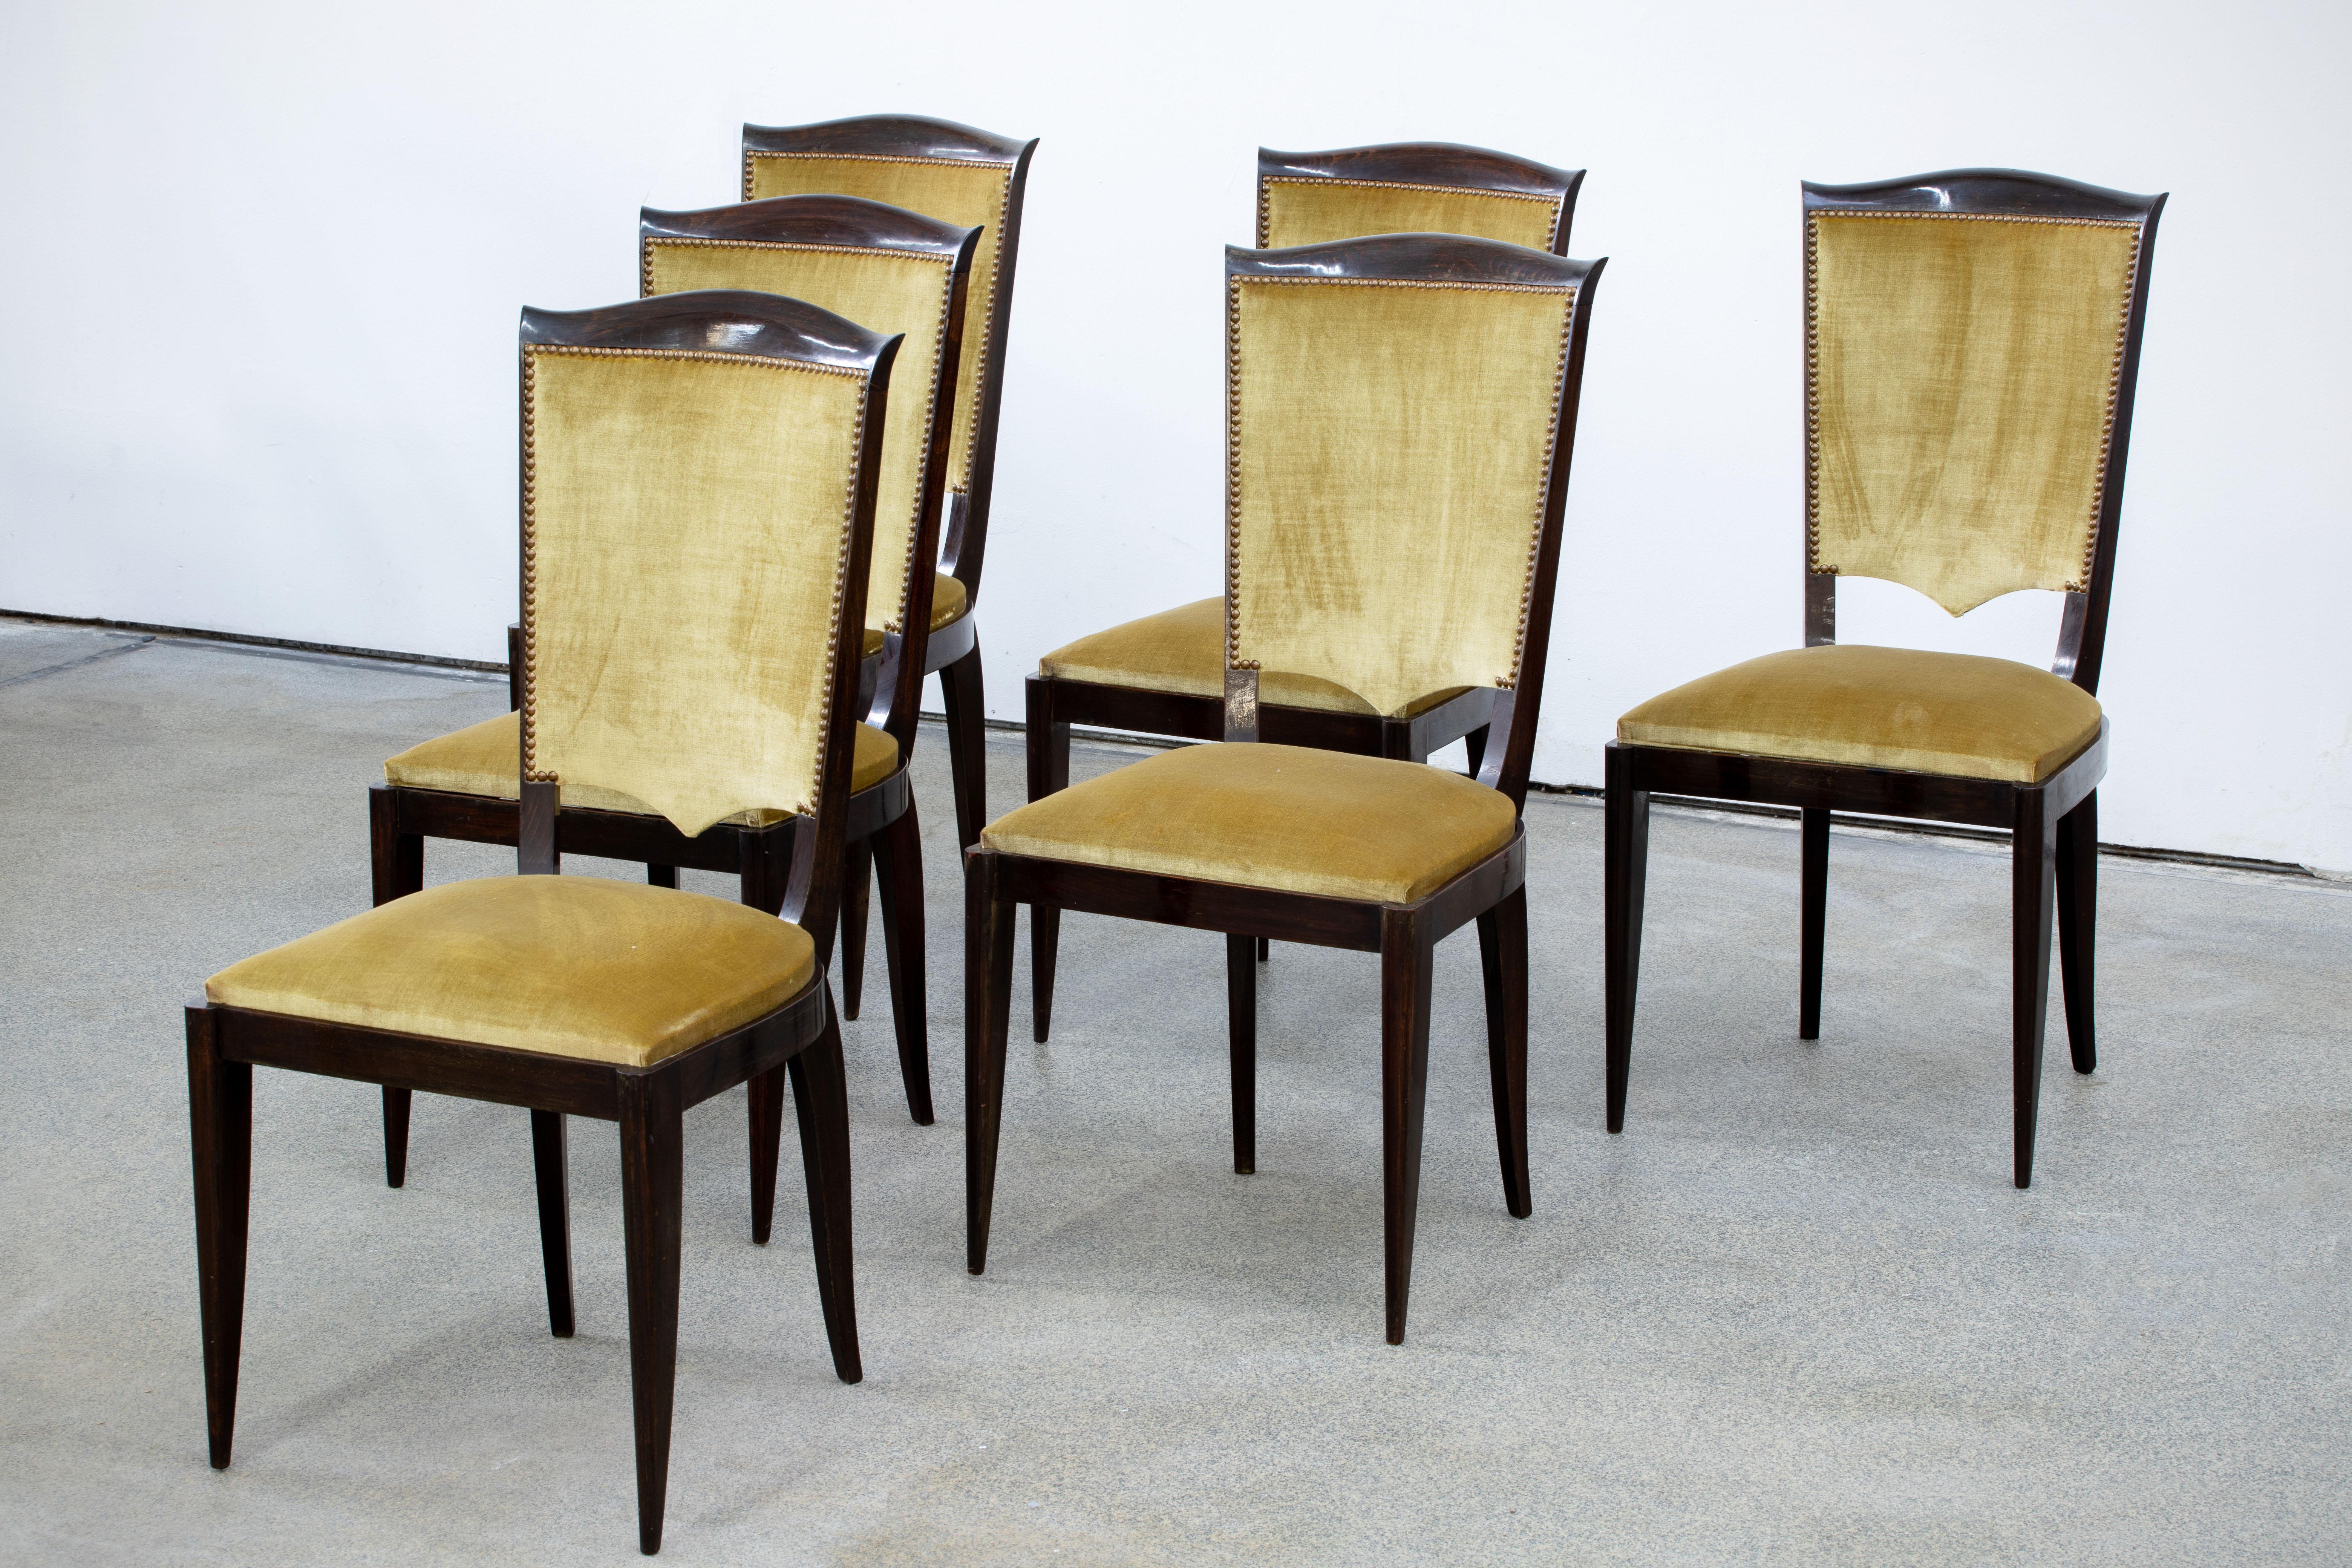 French Art Deco Set of 6 Oak Chairs, France, 1940 For Sale